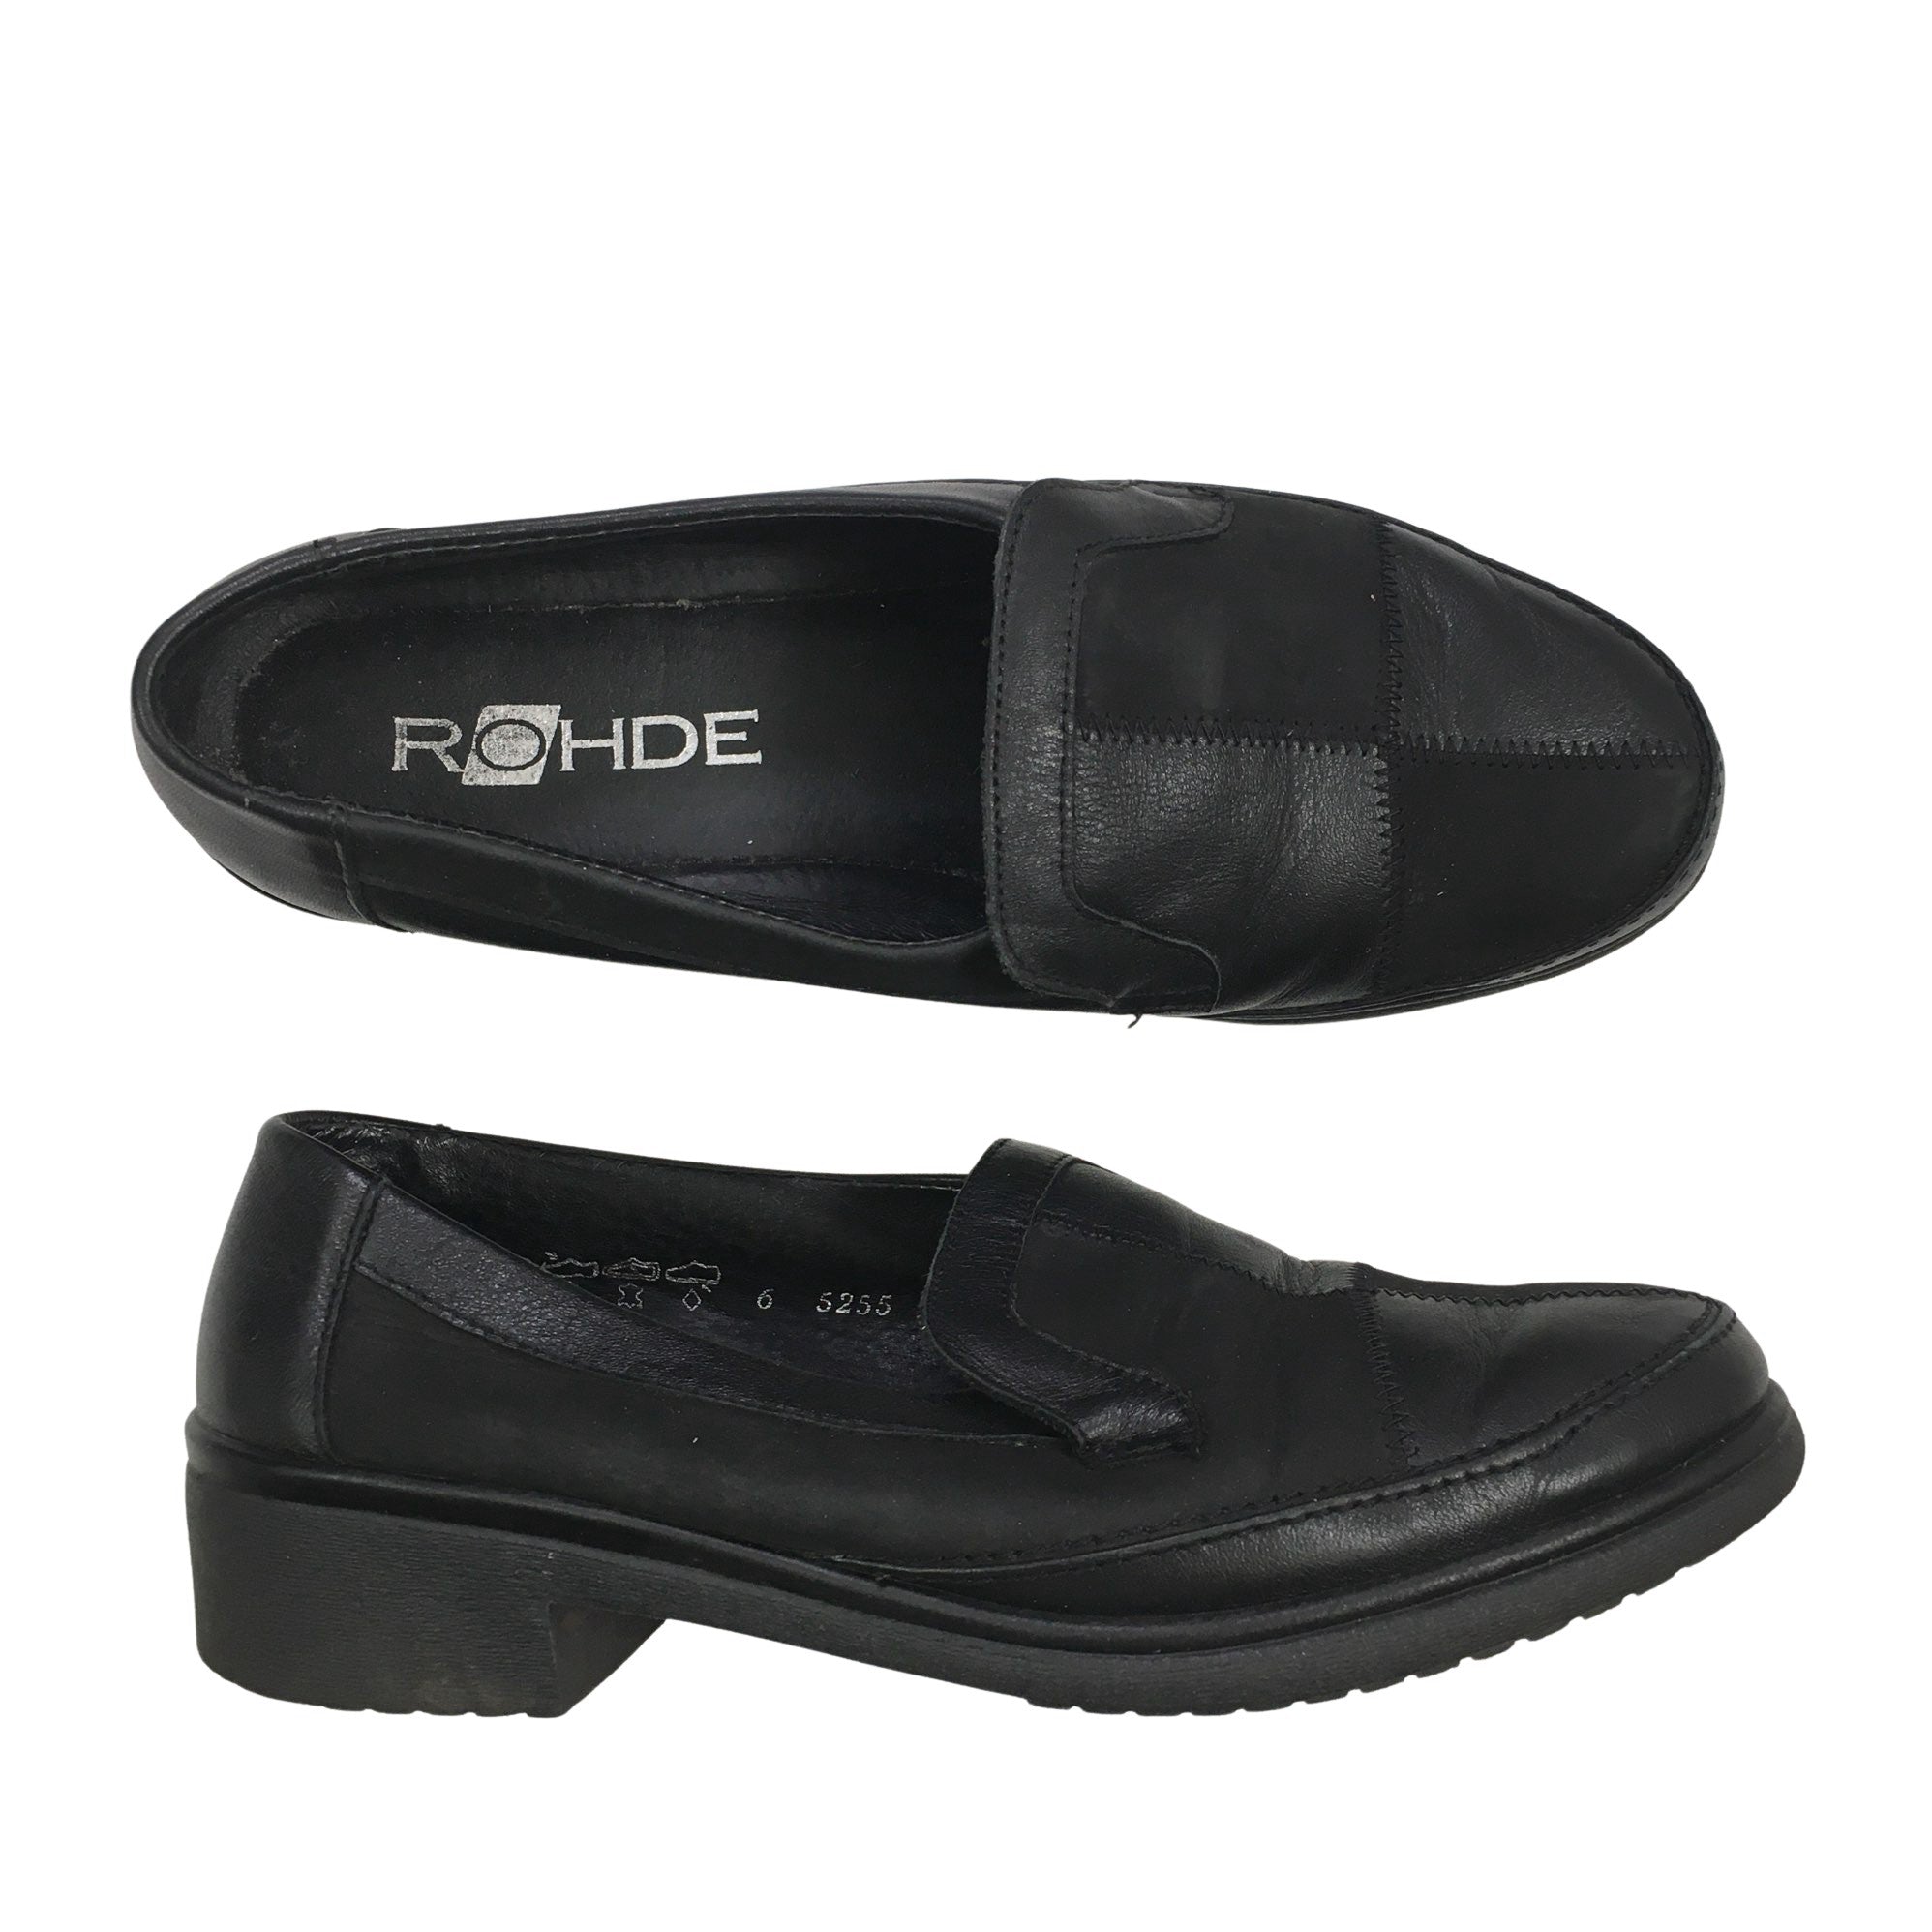 Women's Rohde Loafers, size 39 (Black) |